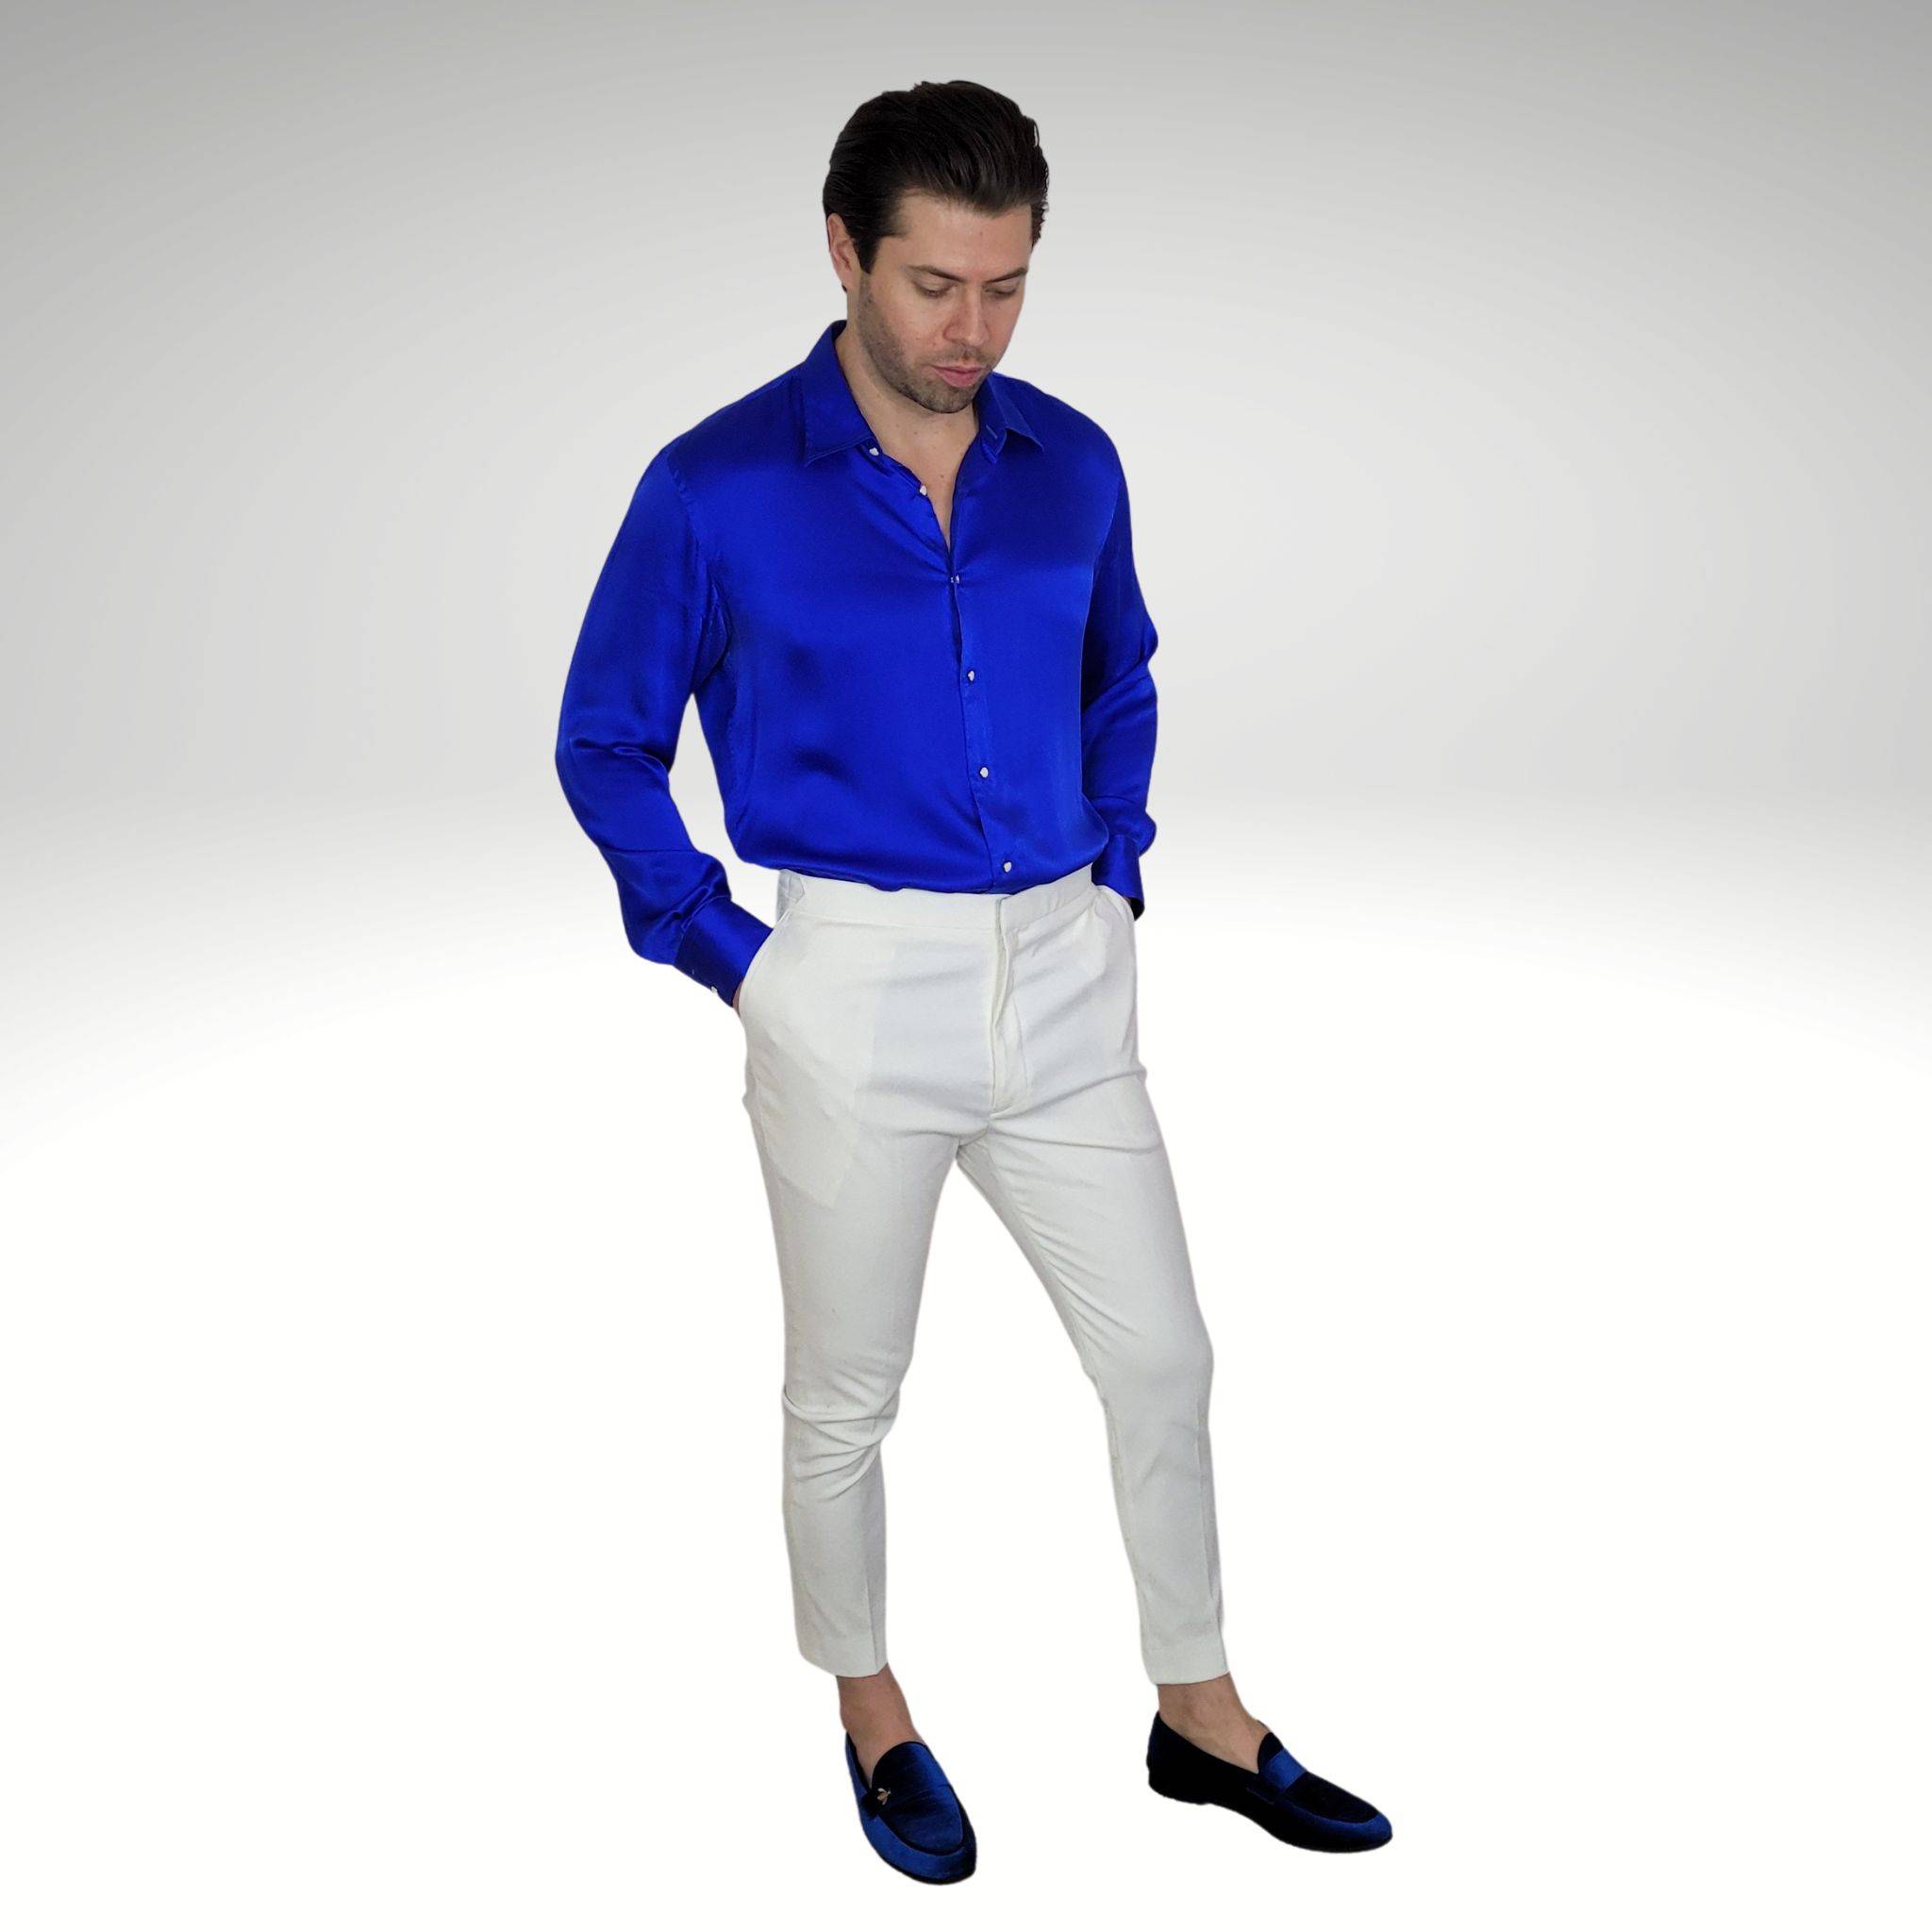 photo of a man wearing a blue silk shirt with white high waisted pants and blue velvet shoes